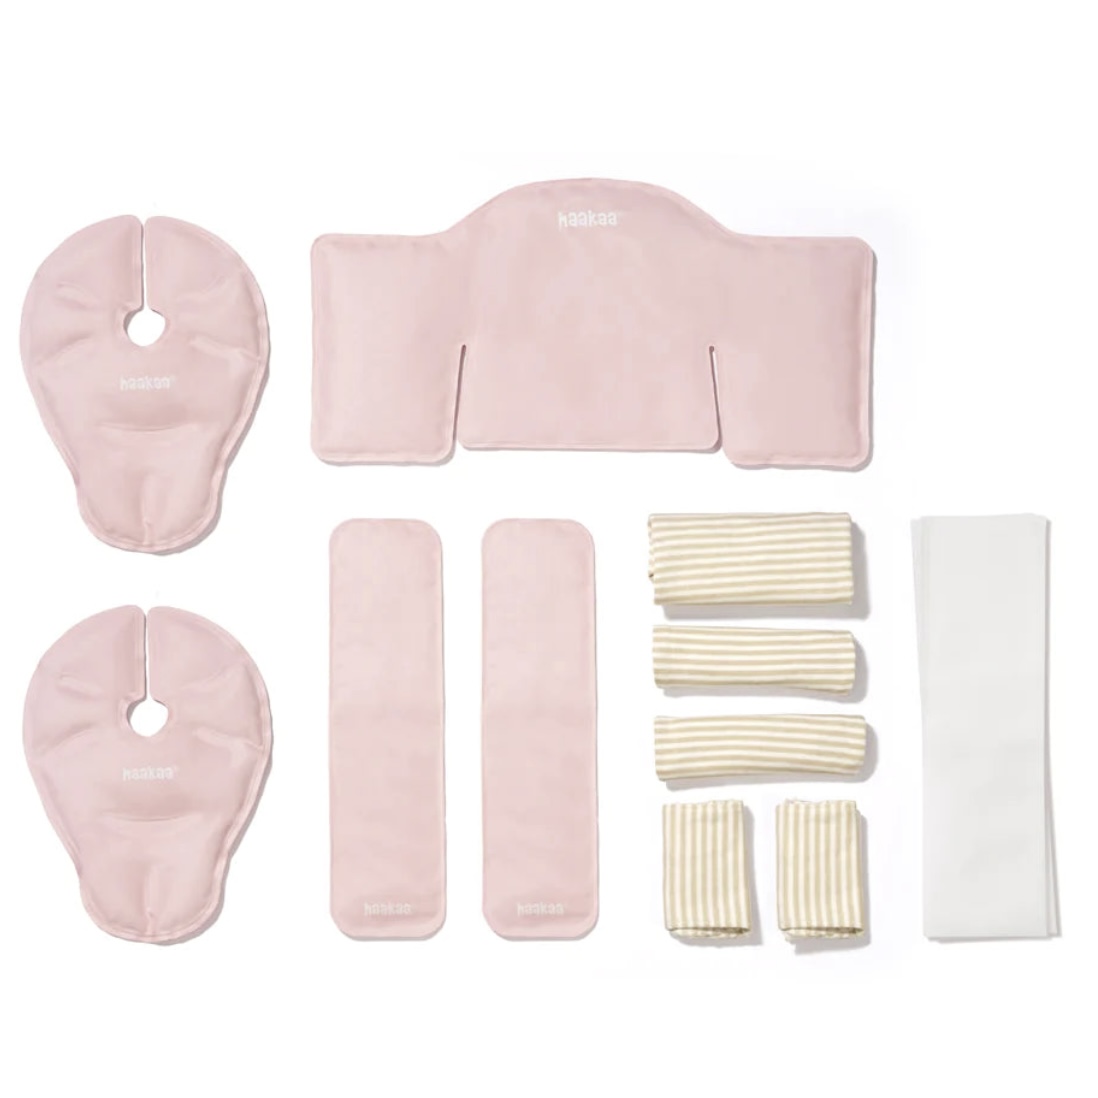 Hot & Cold Reusable Breast & Perineum Pads